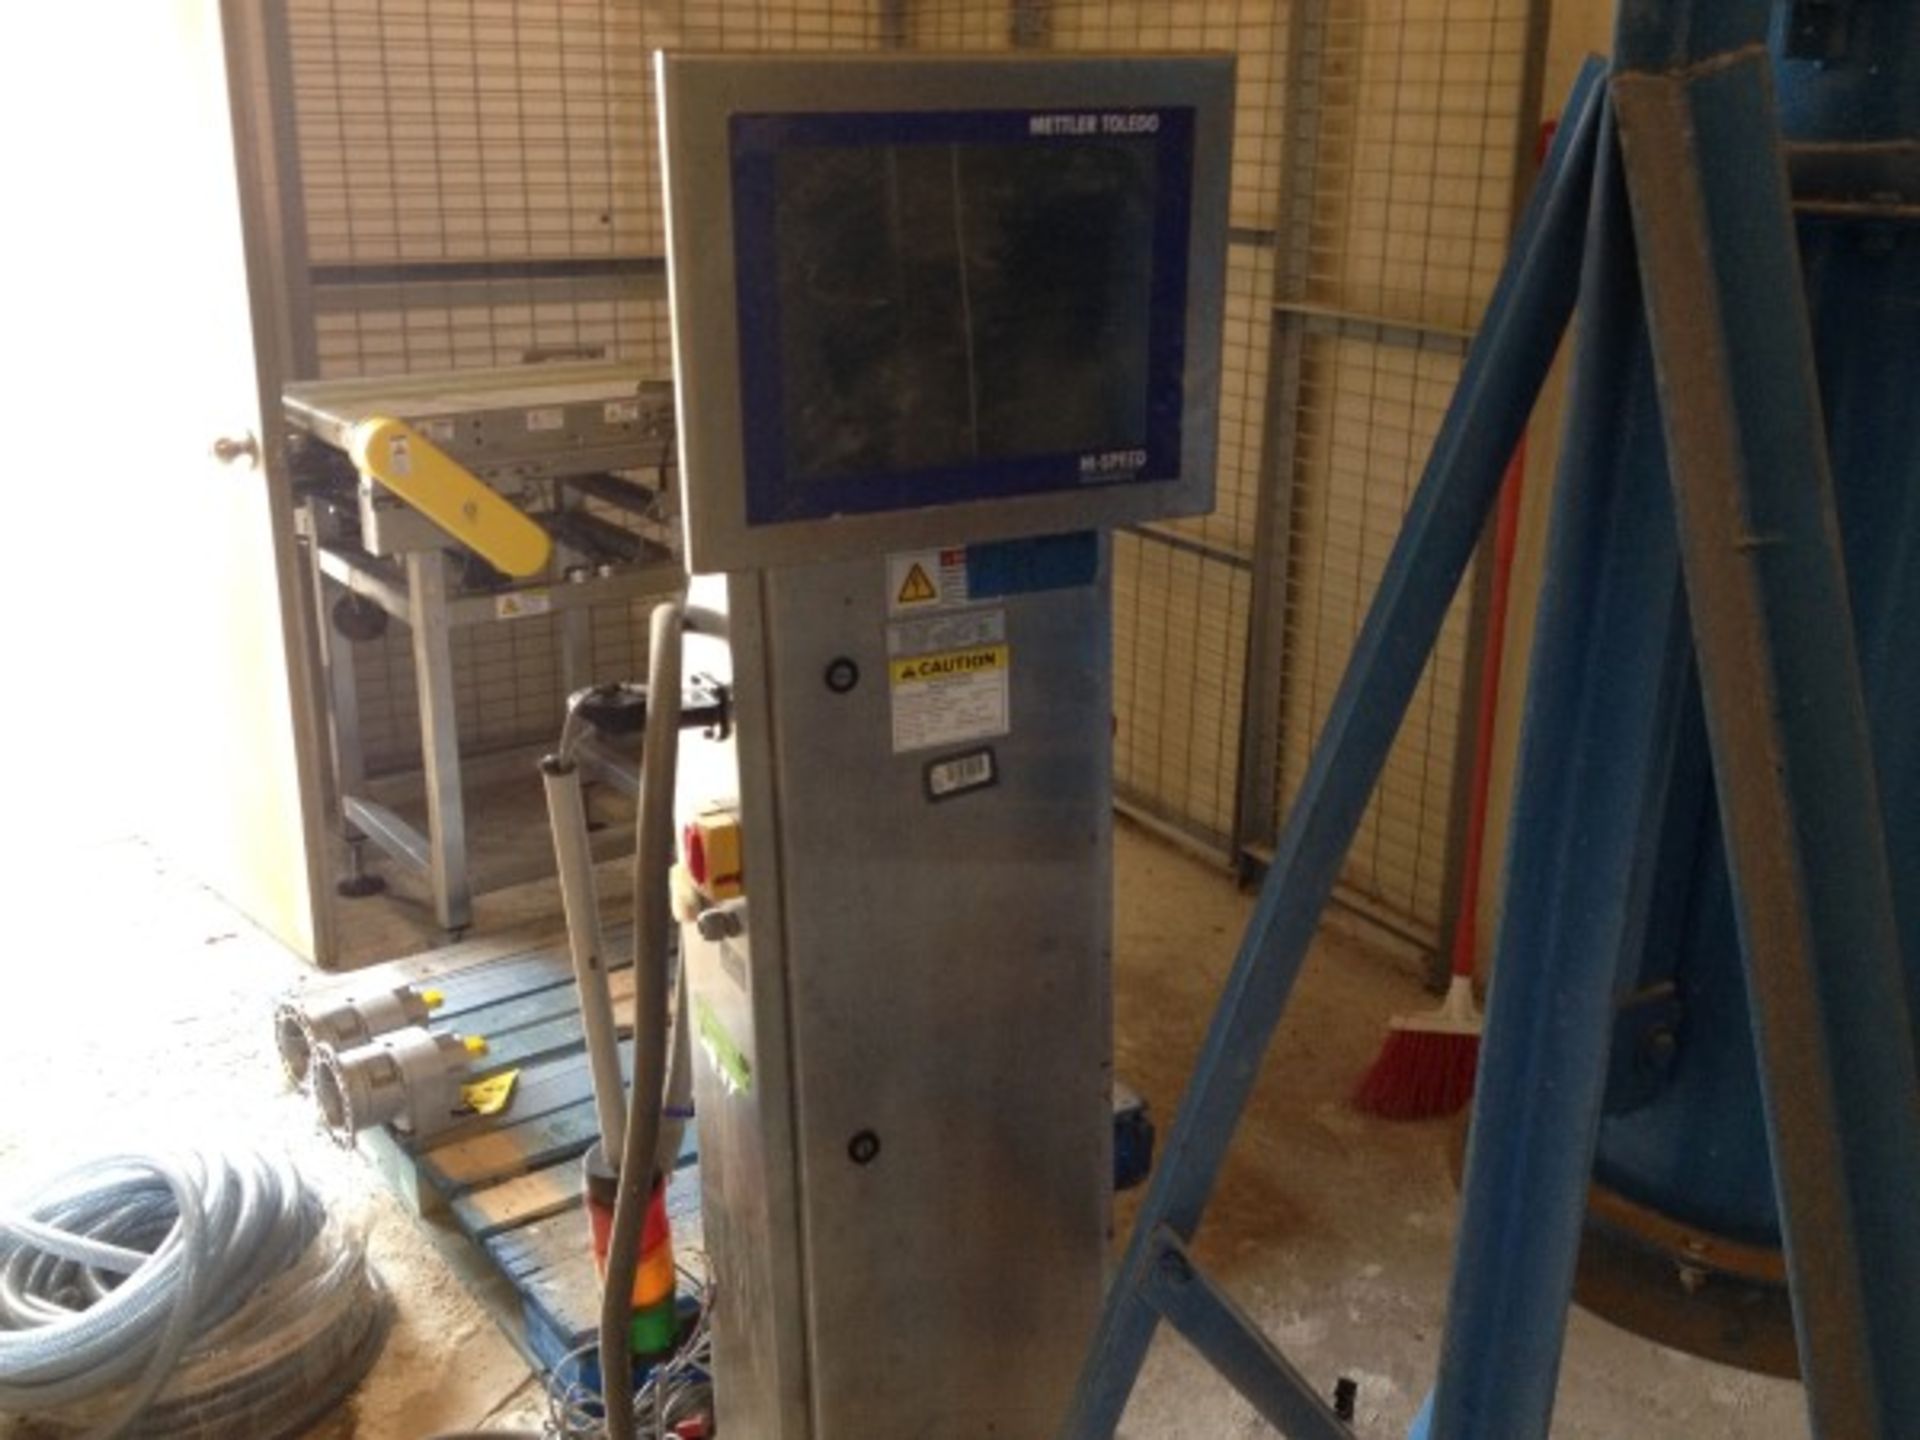 Lot 20: 2011 Mettler Toledo Checkweigher and Control, 24” Belt, 5KG max, MDL. CS3600XS, S/N